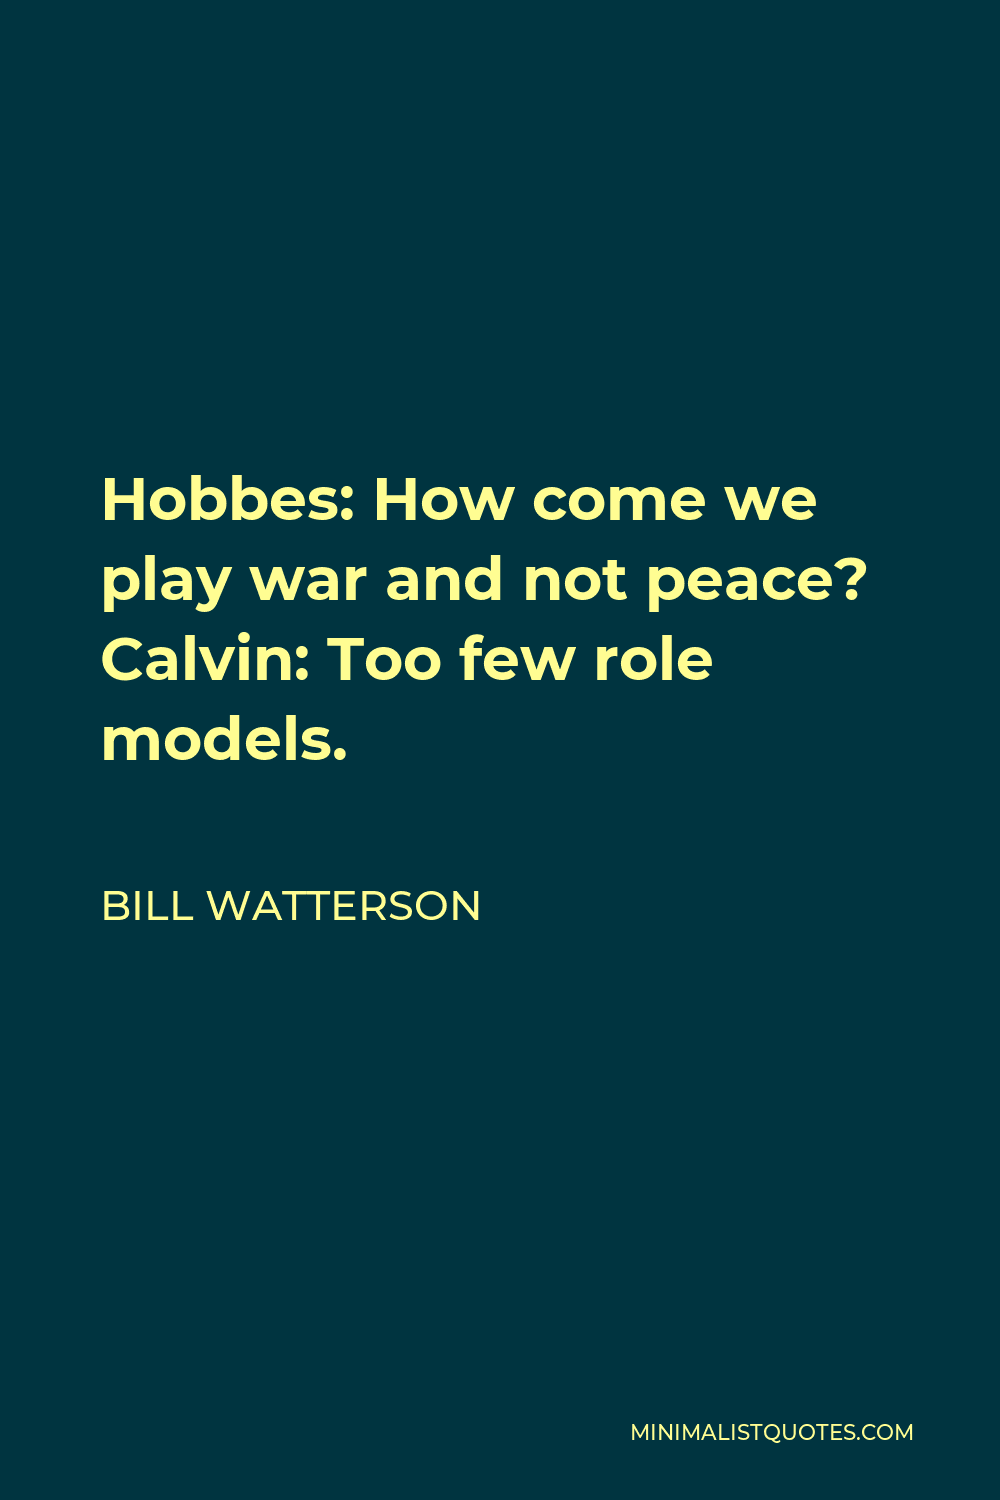 Bill Watterson Quote - Hobbes: How come we play war and not peace? Calvin: Too few role models.